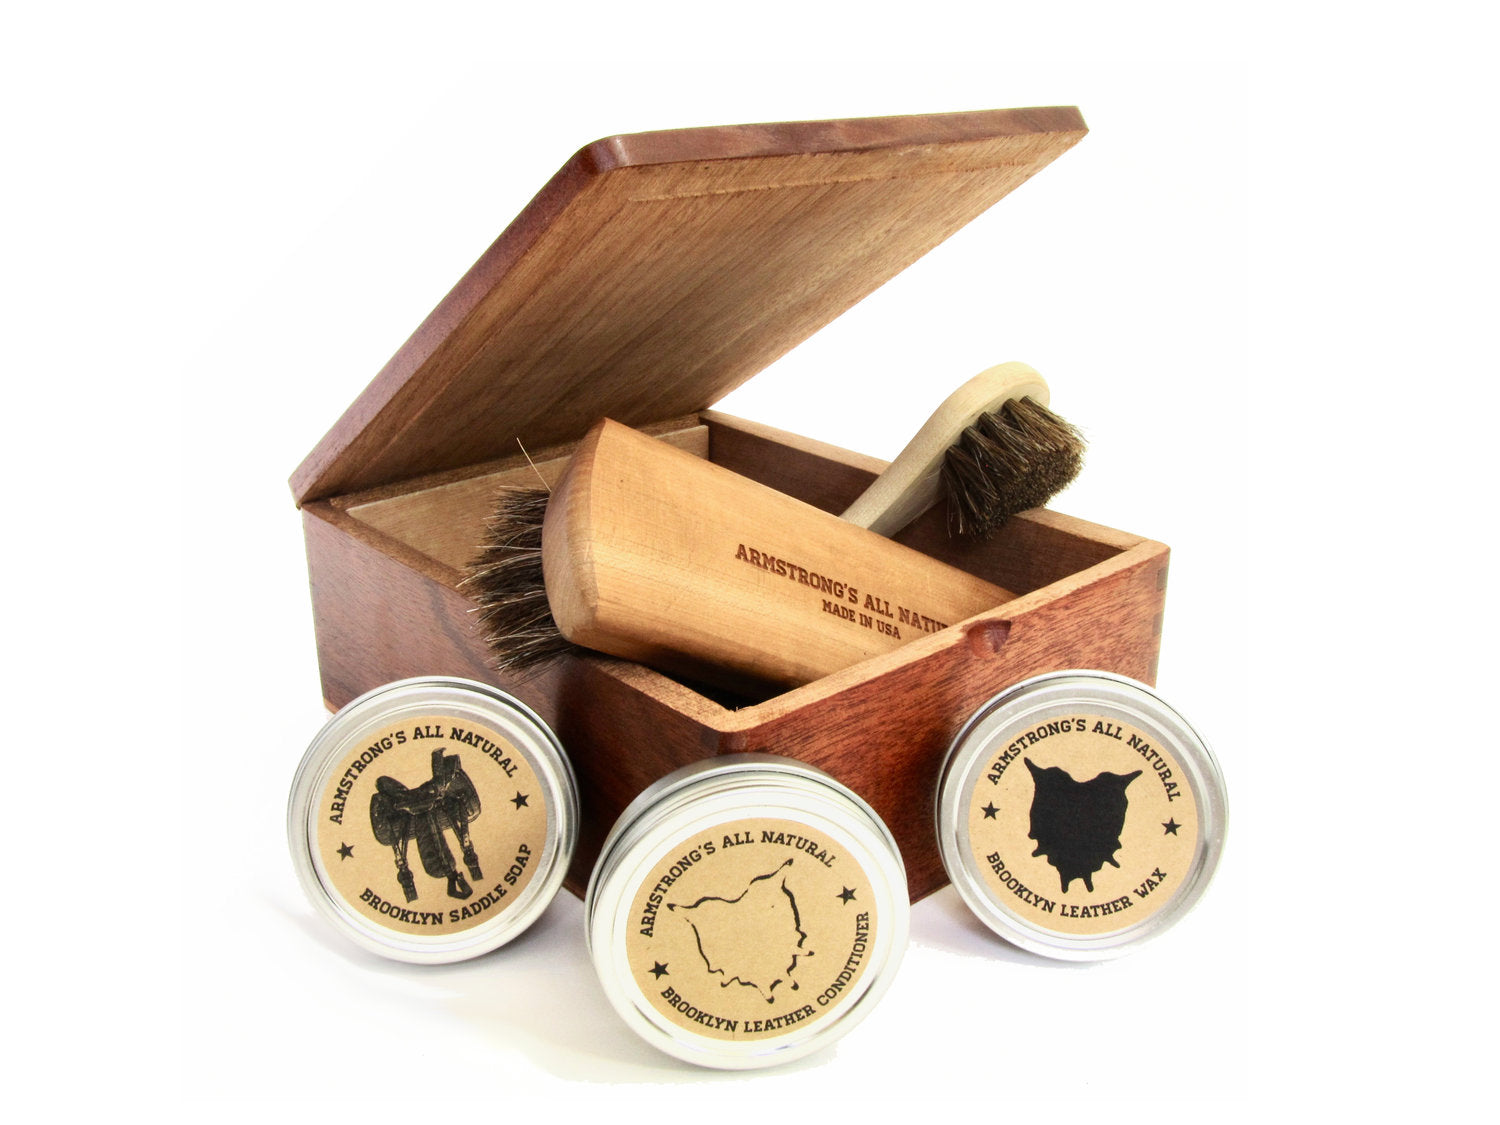 A sustainable gift These are premium reclaimed, upcycled cigar boxes that we have painstakingly restored and refinished to hold your leather and shoe care products, salves, and whatever else you want.